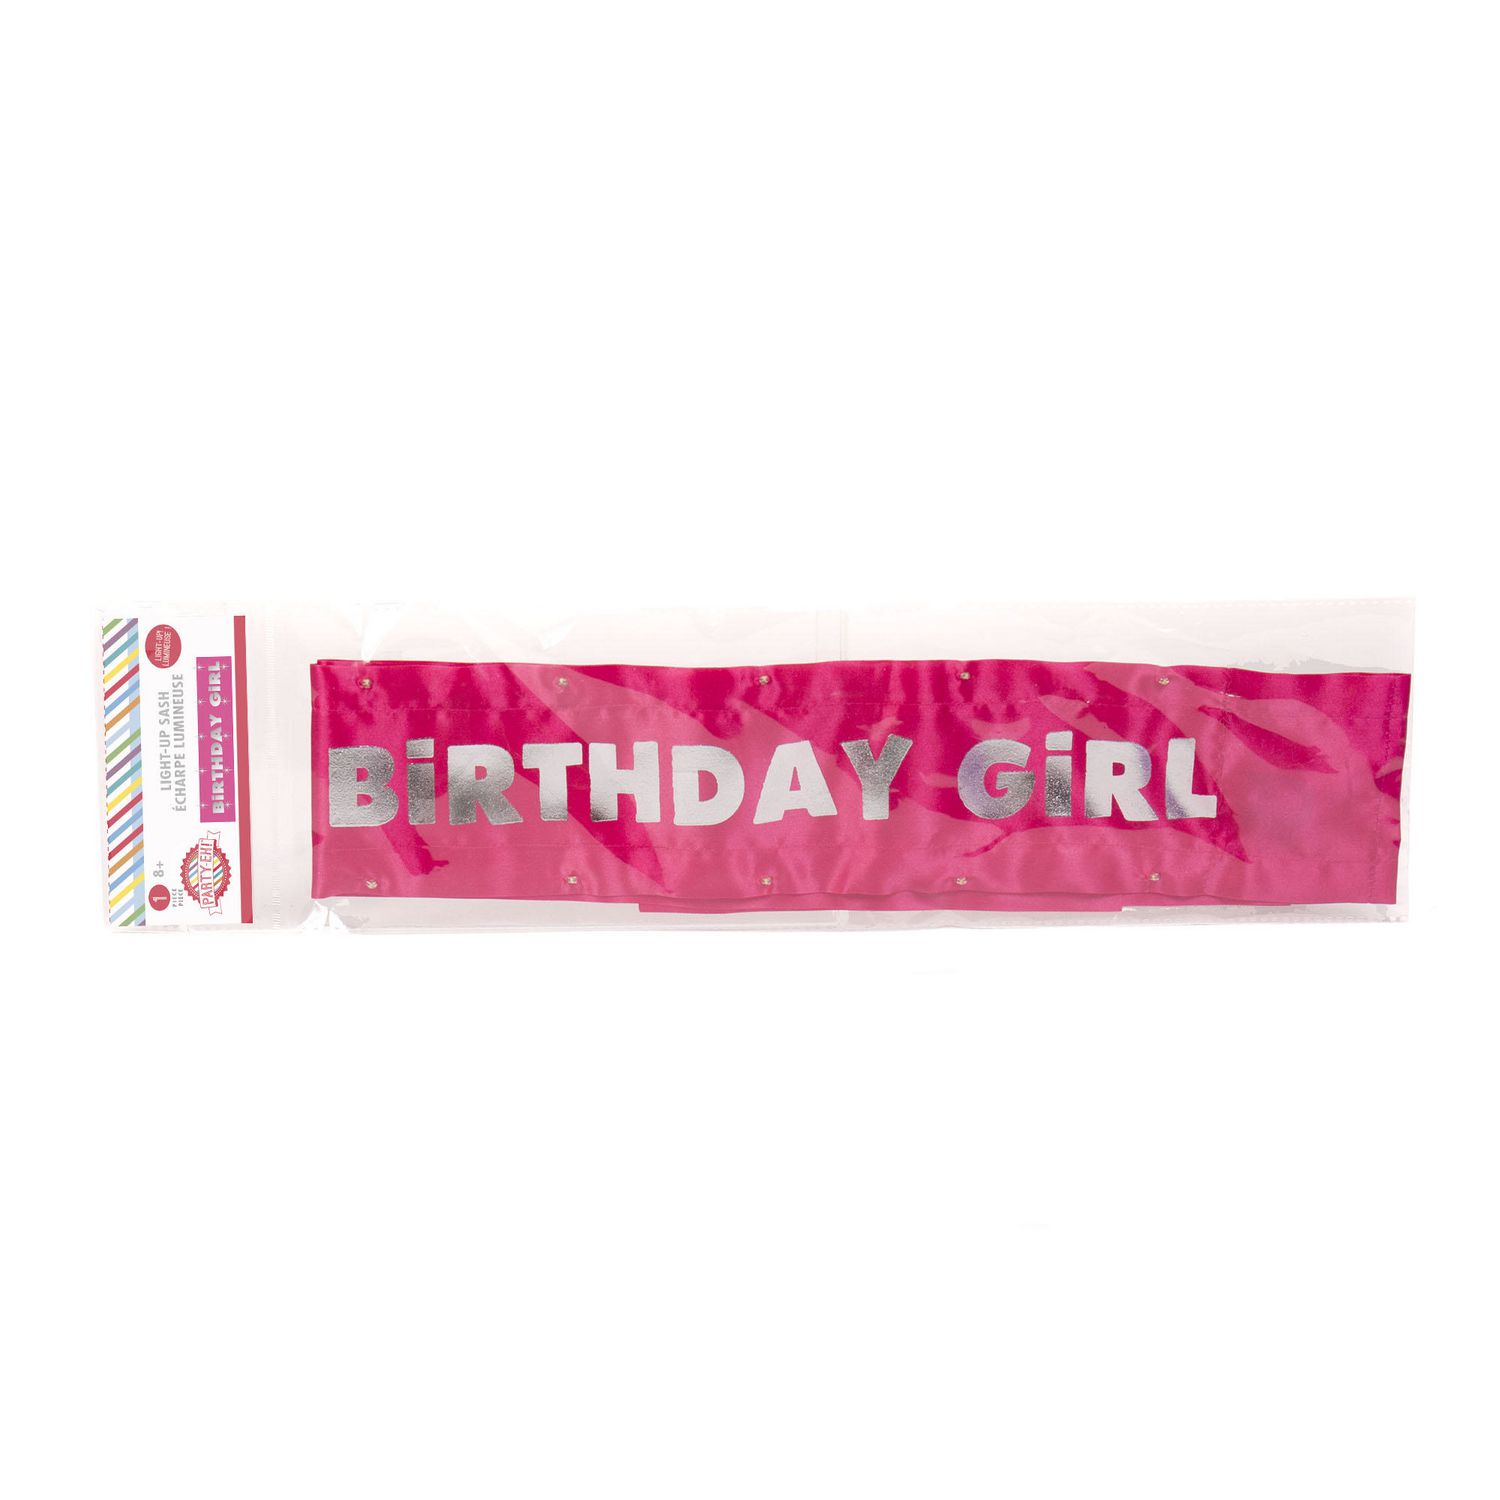 Party-eh! Party Eh! “Birthday Girl” Light up Sash by Horizon Group USA ...